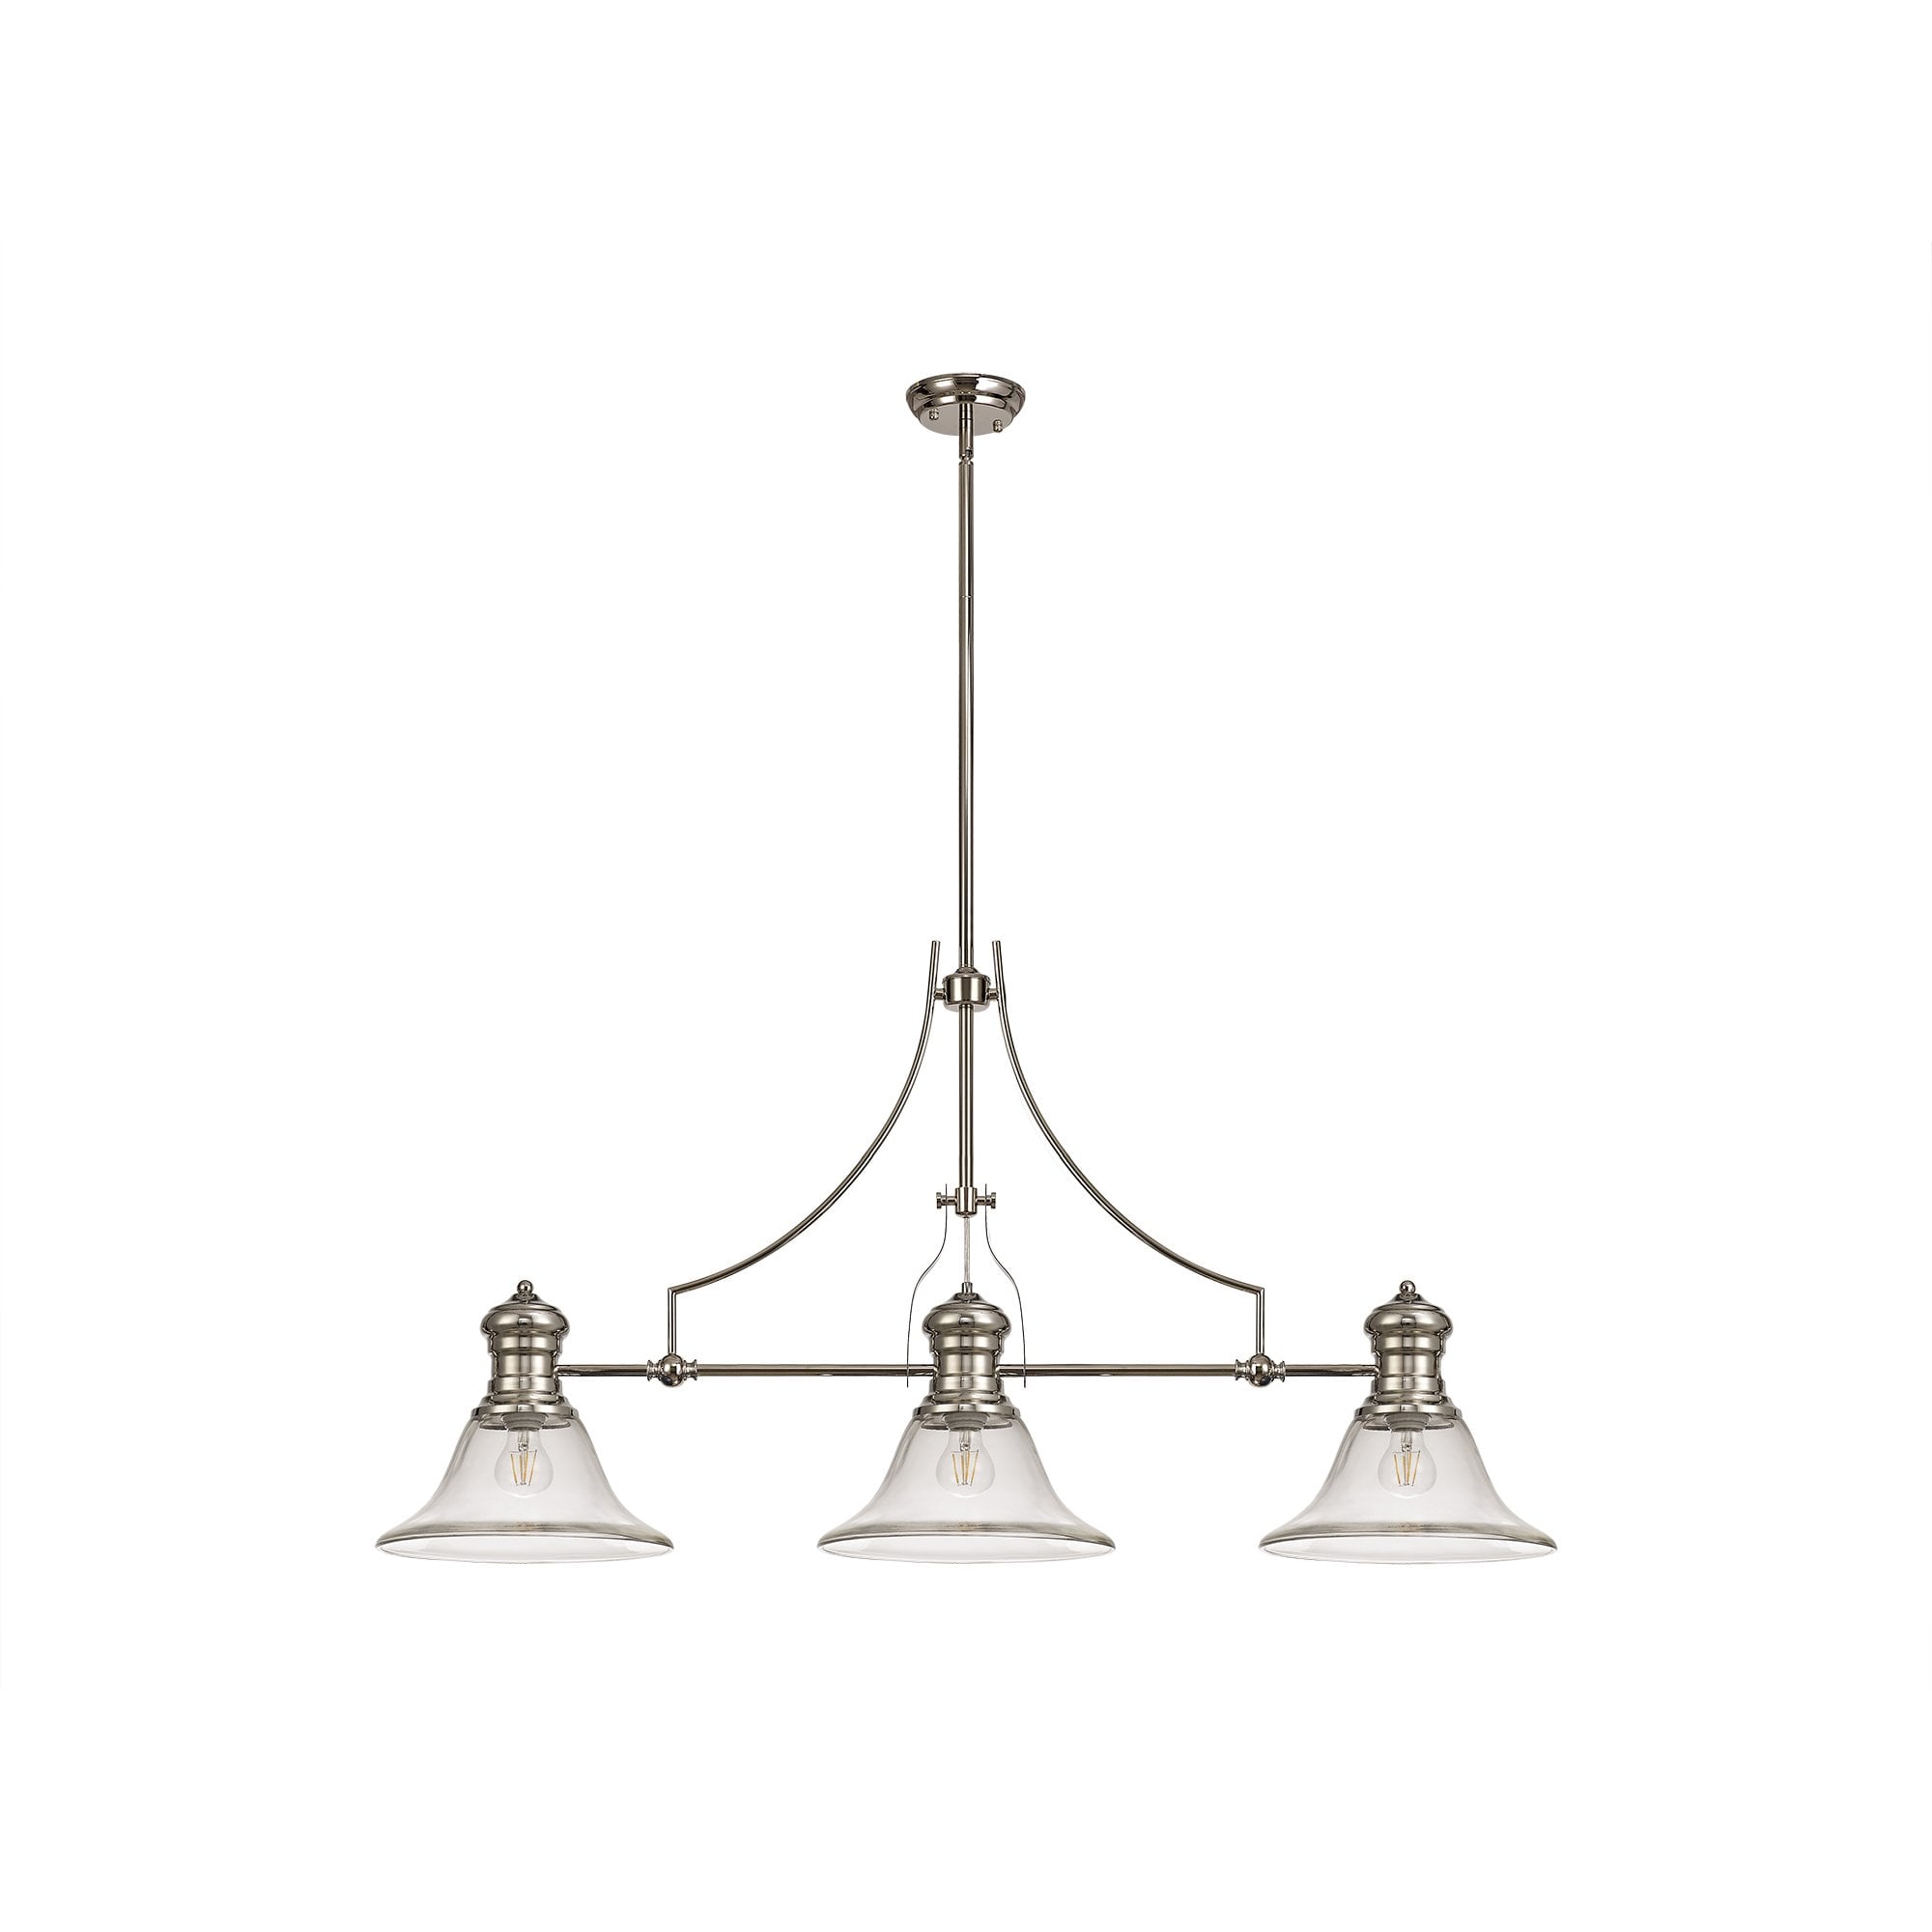 3 Light Telescopic Pendant E27 With 30cm Smooth Bell Glass Shade, Polished Nickel/Clear